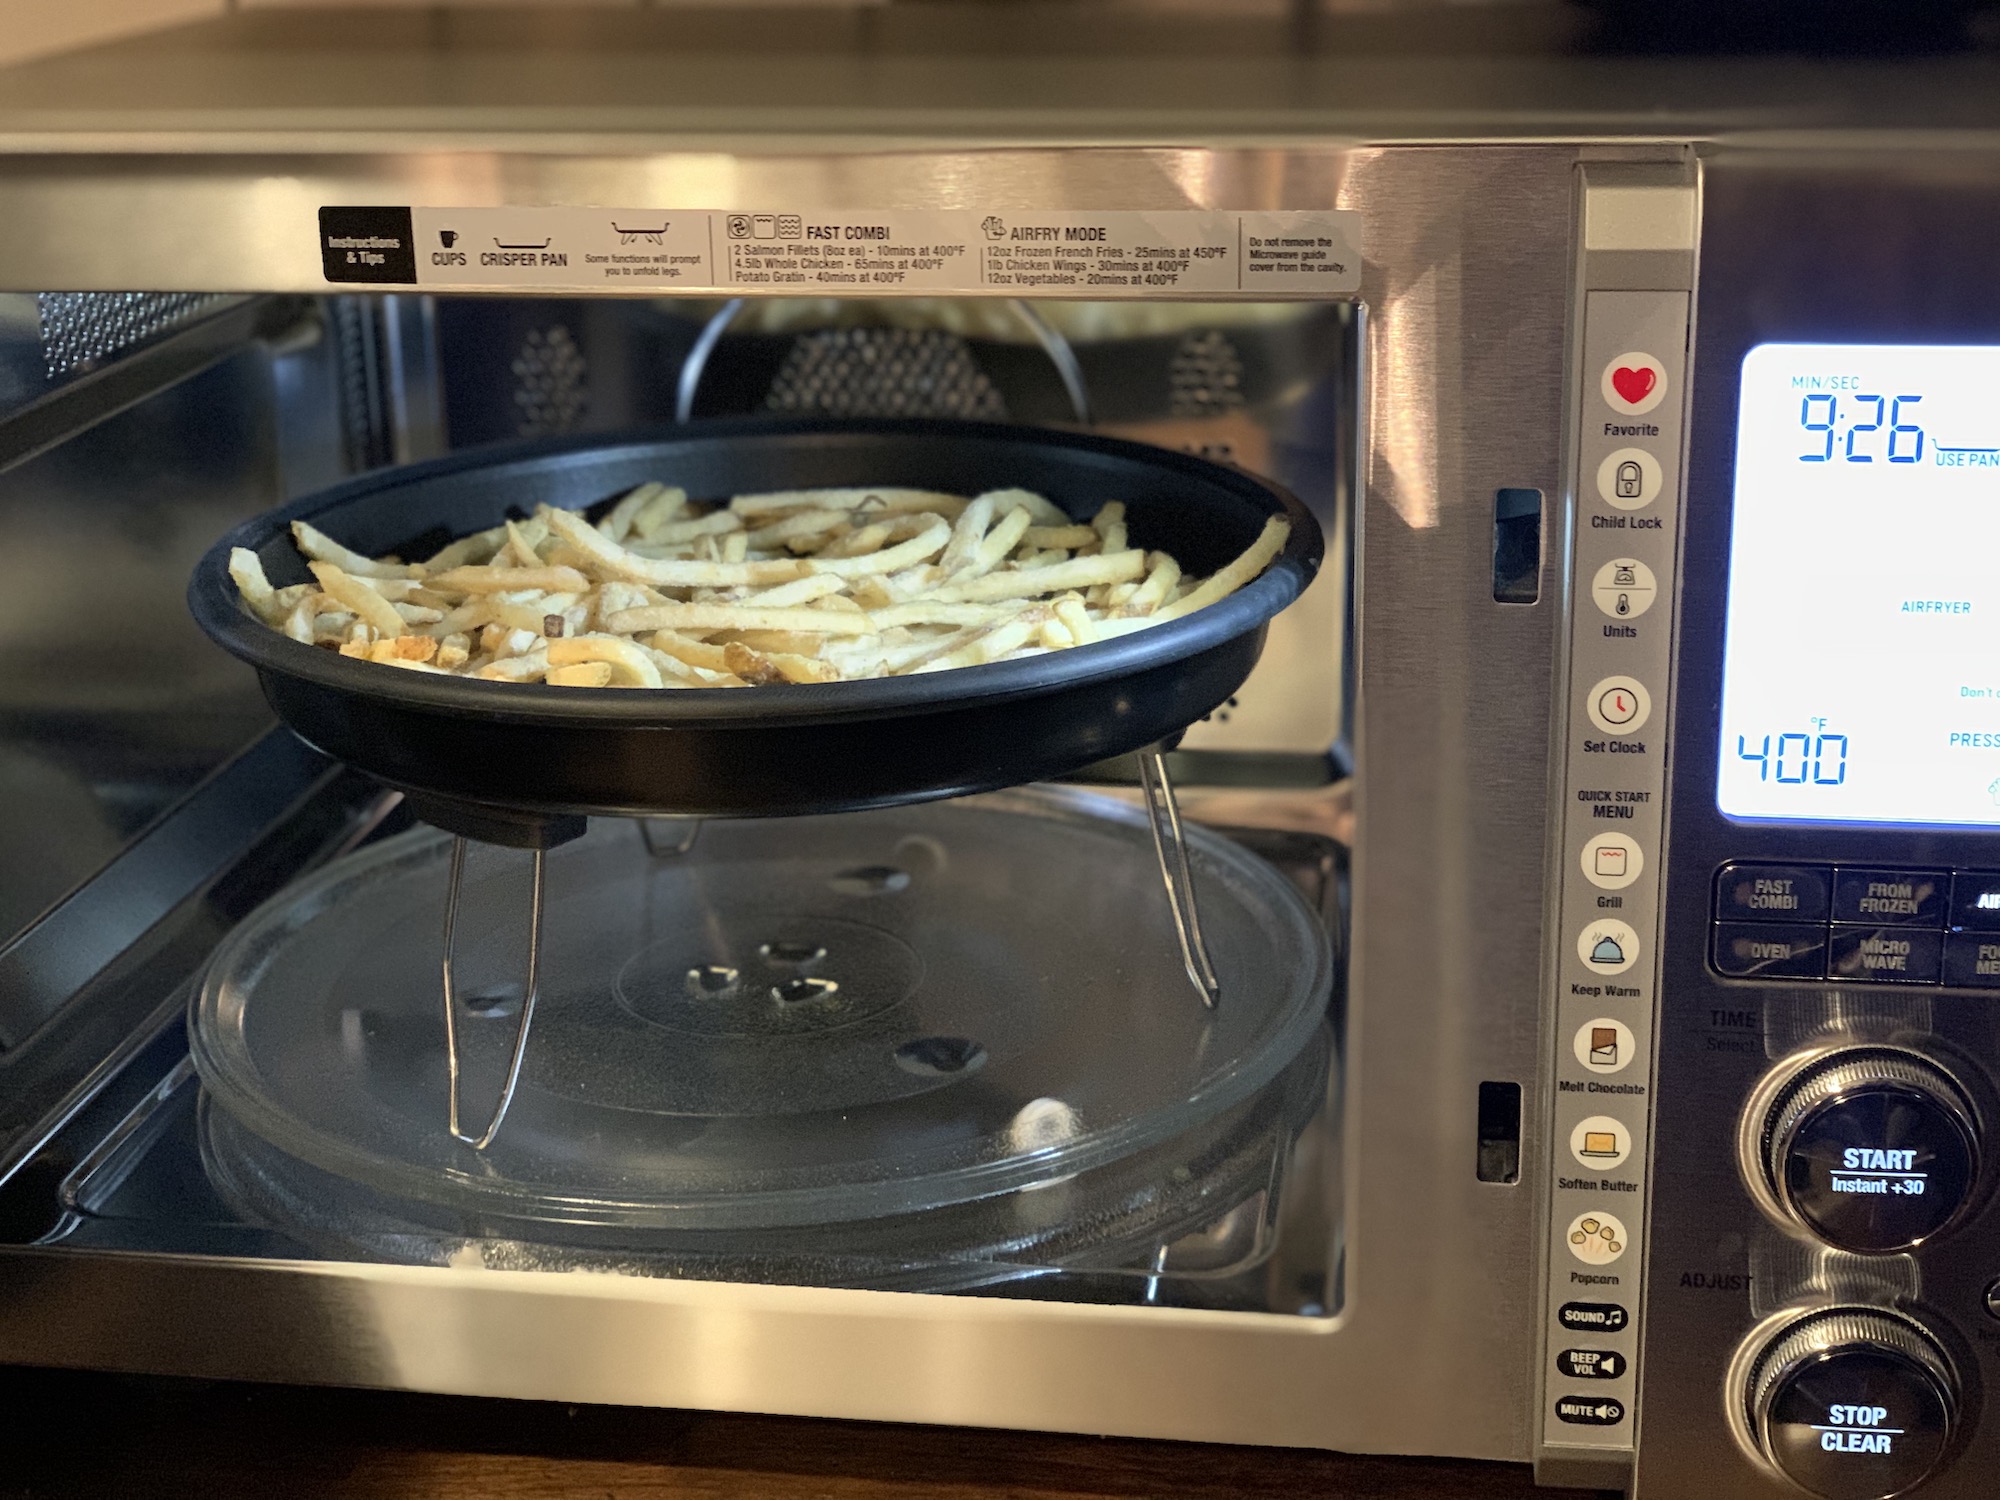 Breville 3-in-1 air fry microwave